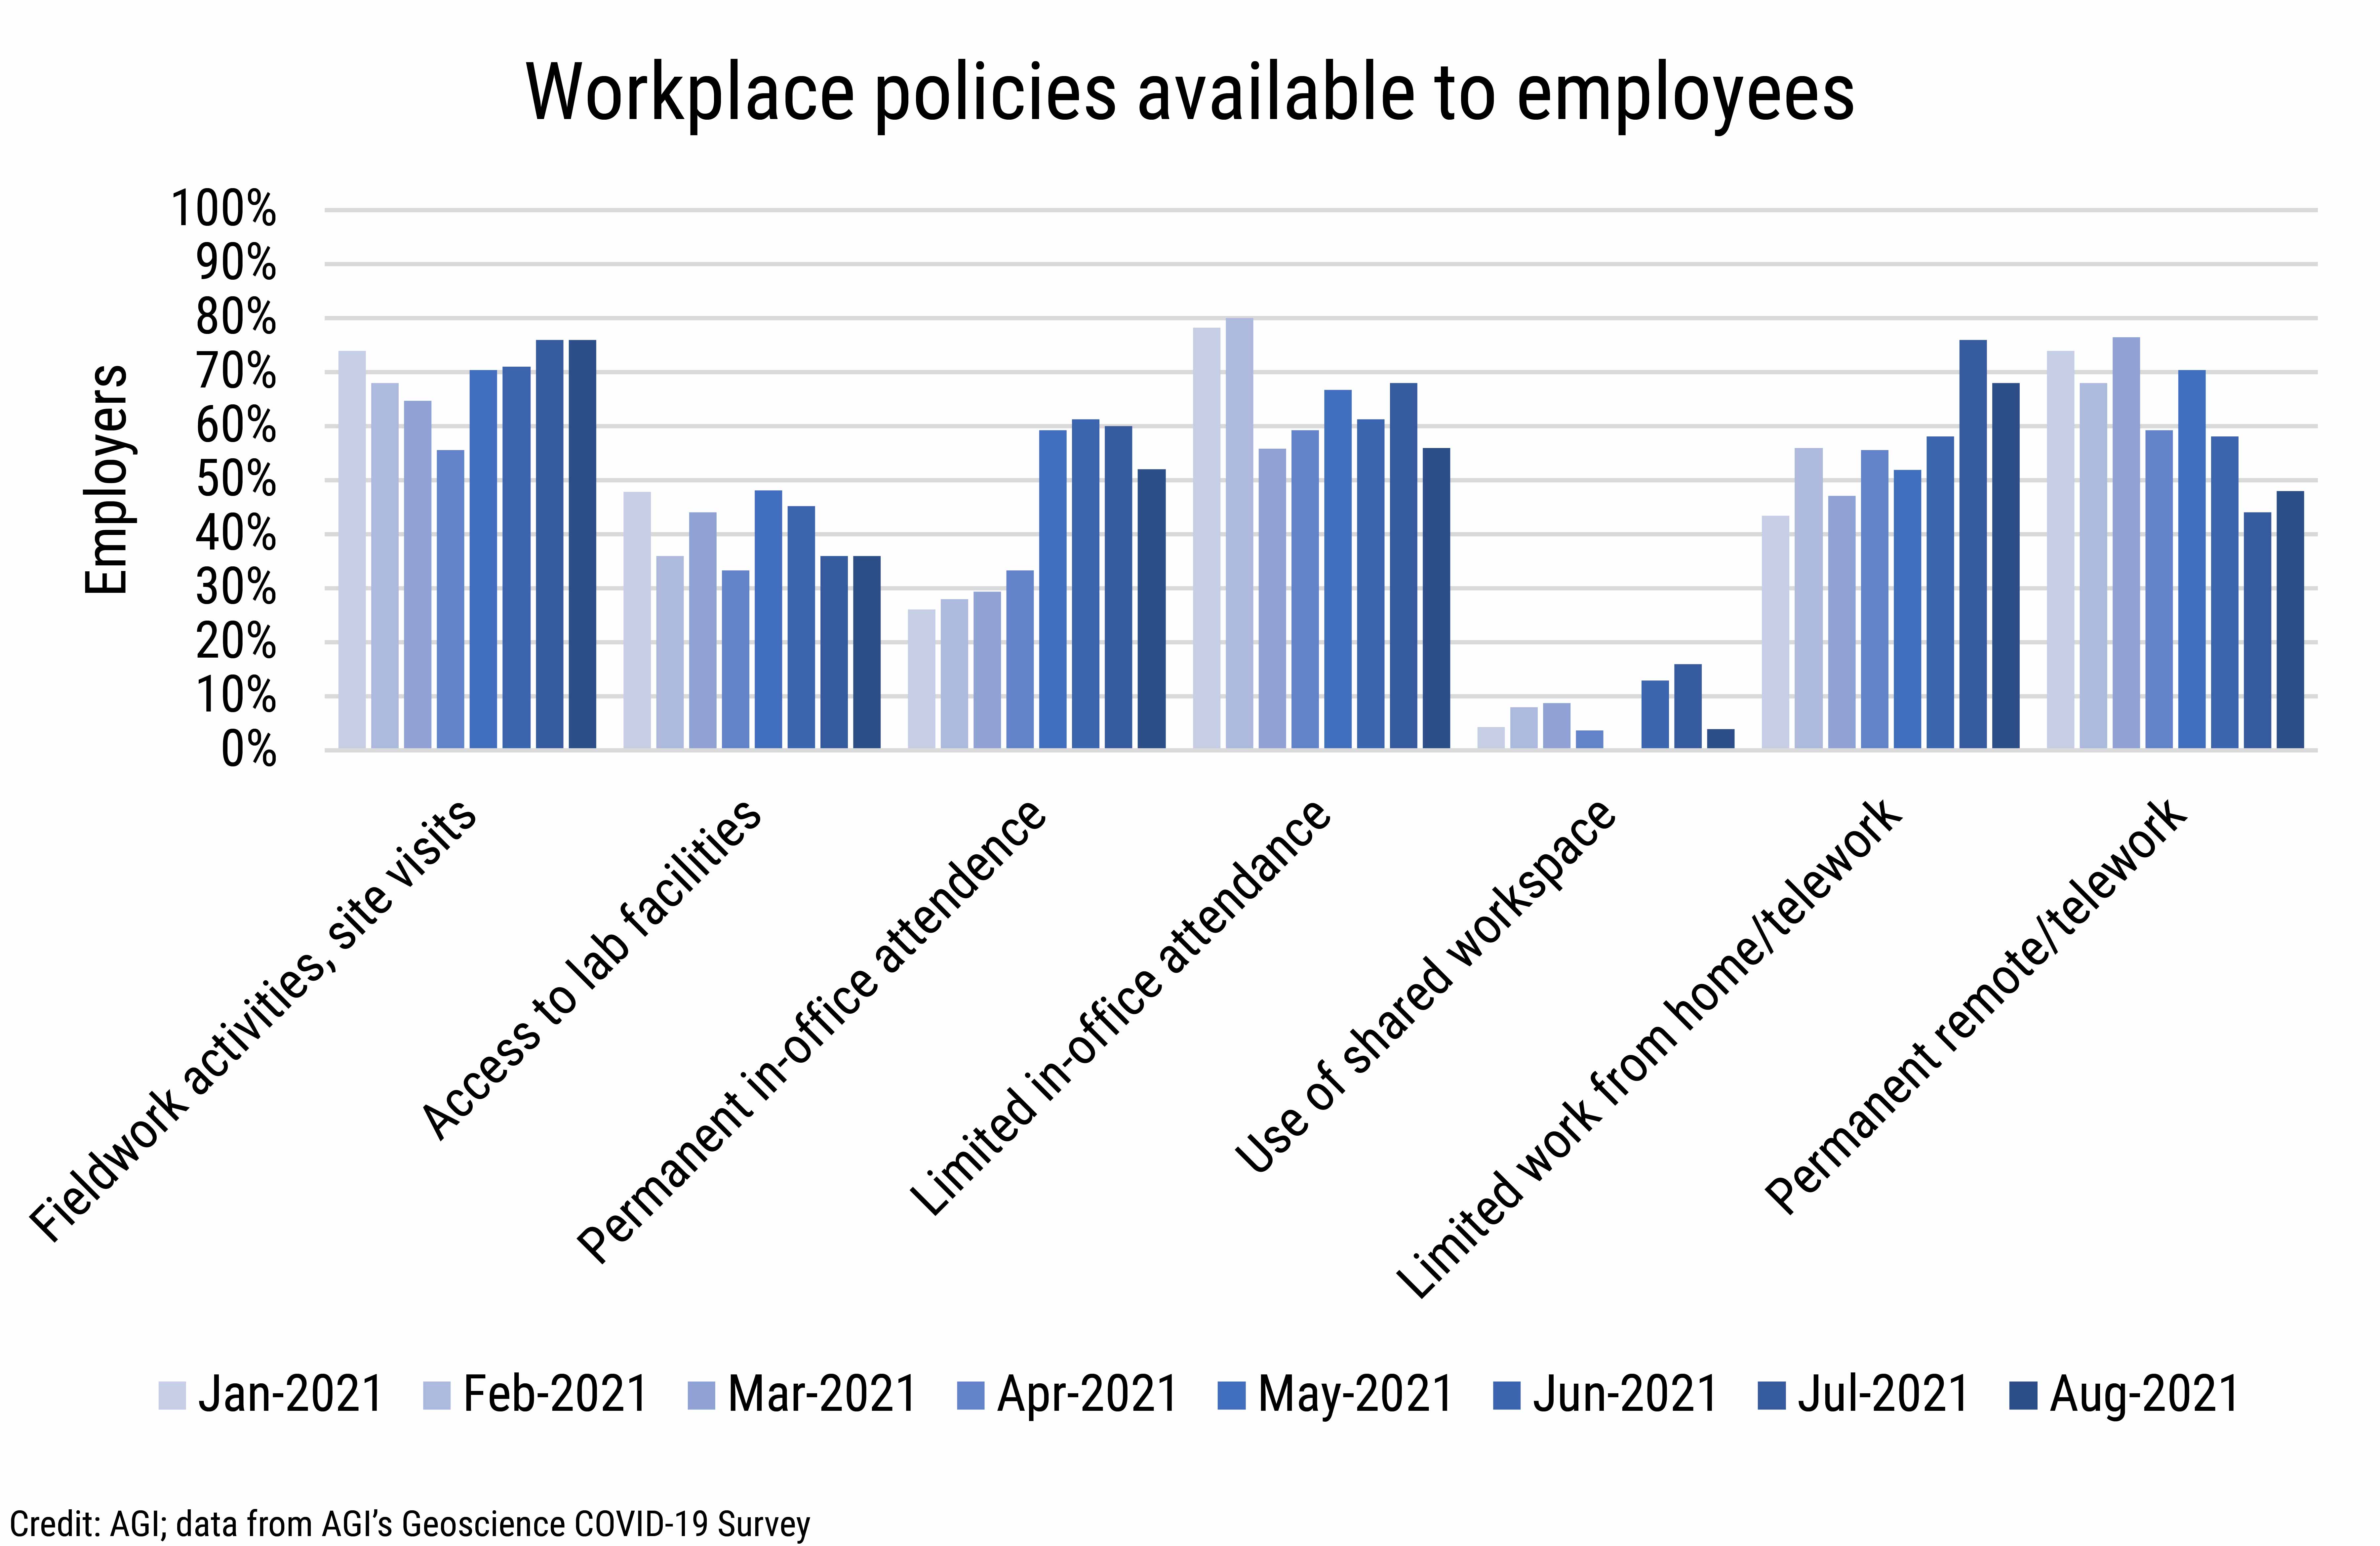 DB_2021-030 chart 05: Workplace policies available to employees (Credit: AGI; data from AGI&#039;s Geoscience COVID-19 Survey)